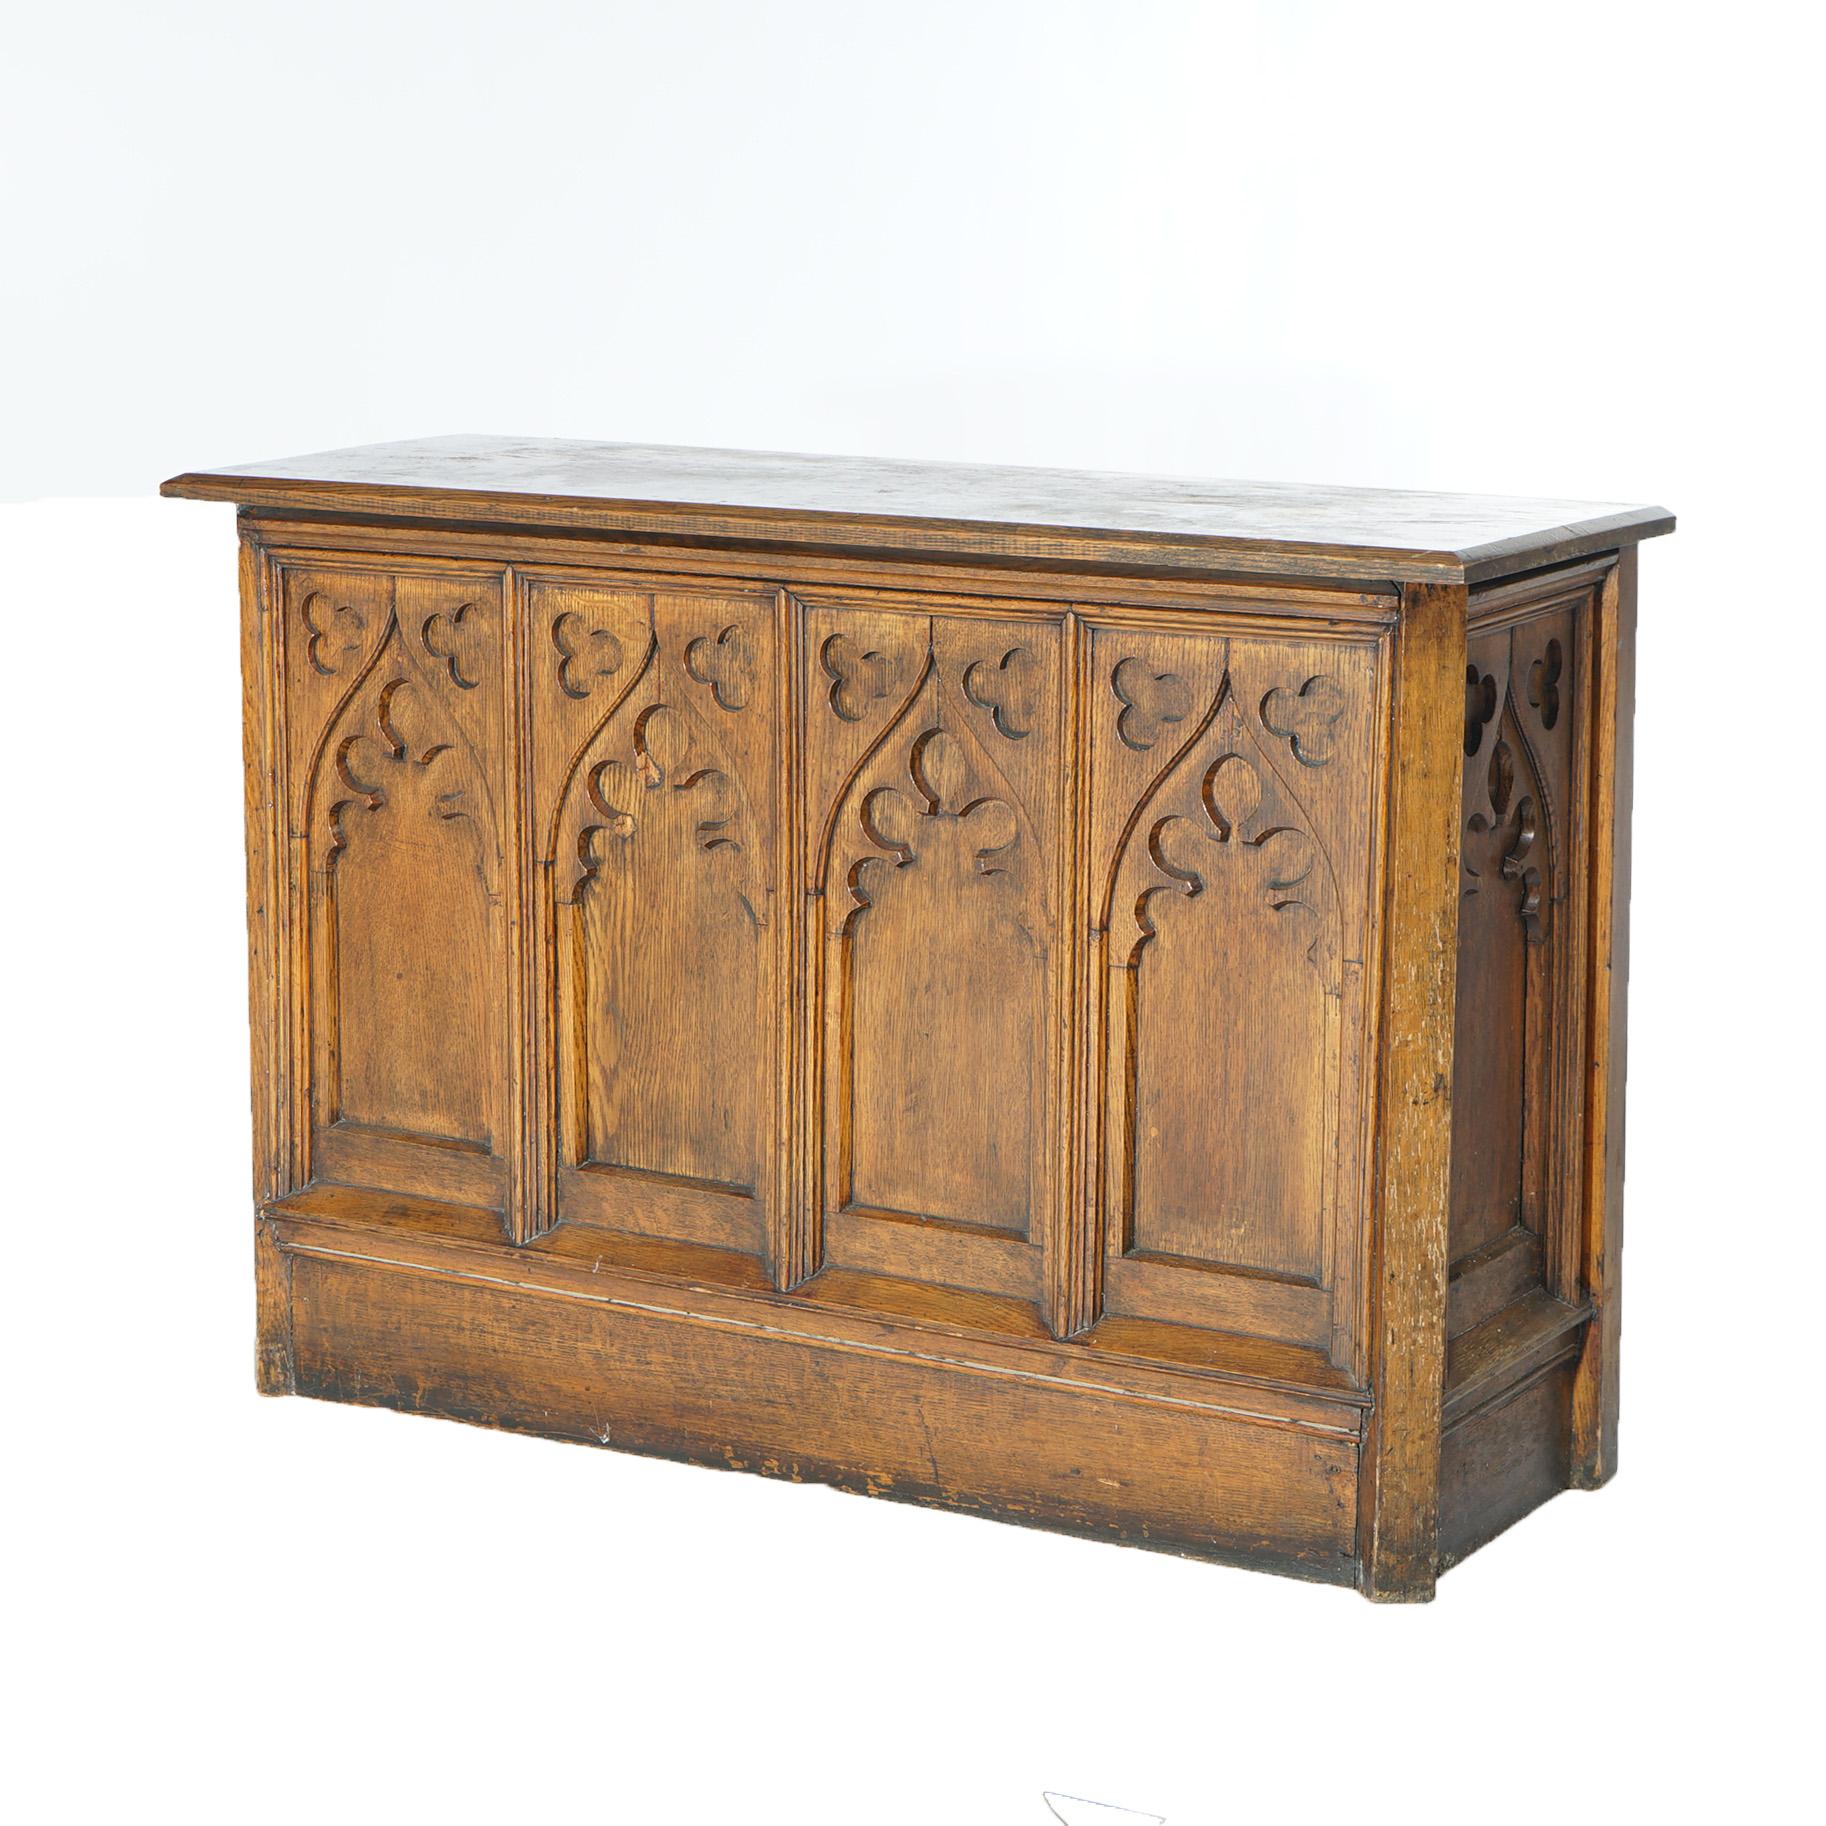 An antique Gothic Revival console table offers quarter sawn oak paneled construction with carved stylized arches, 19th century

Measures - 27